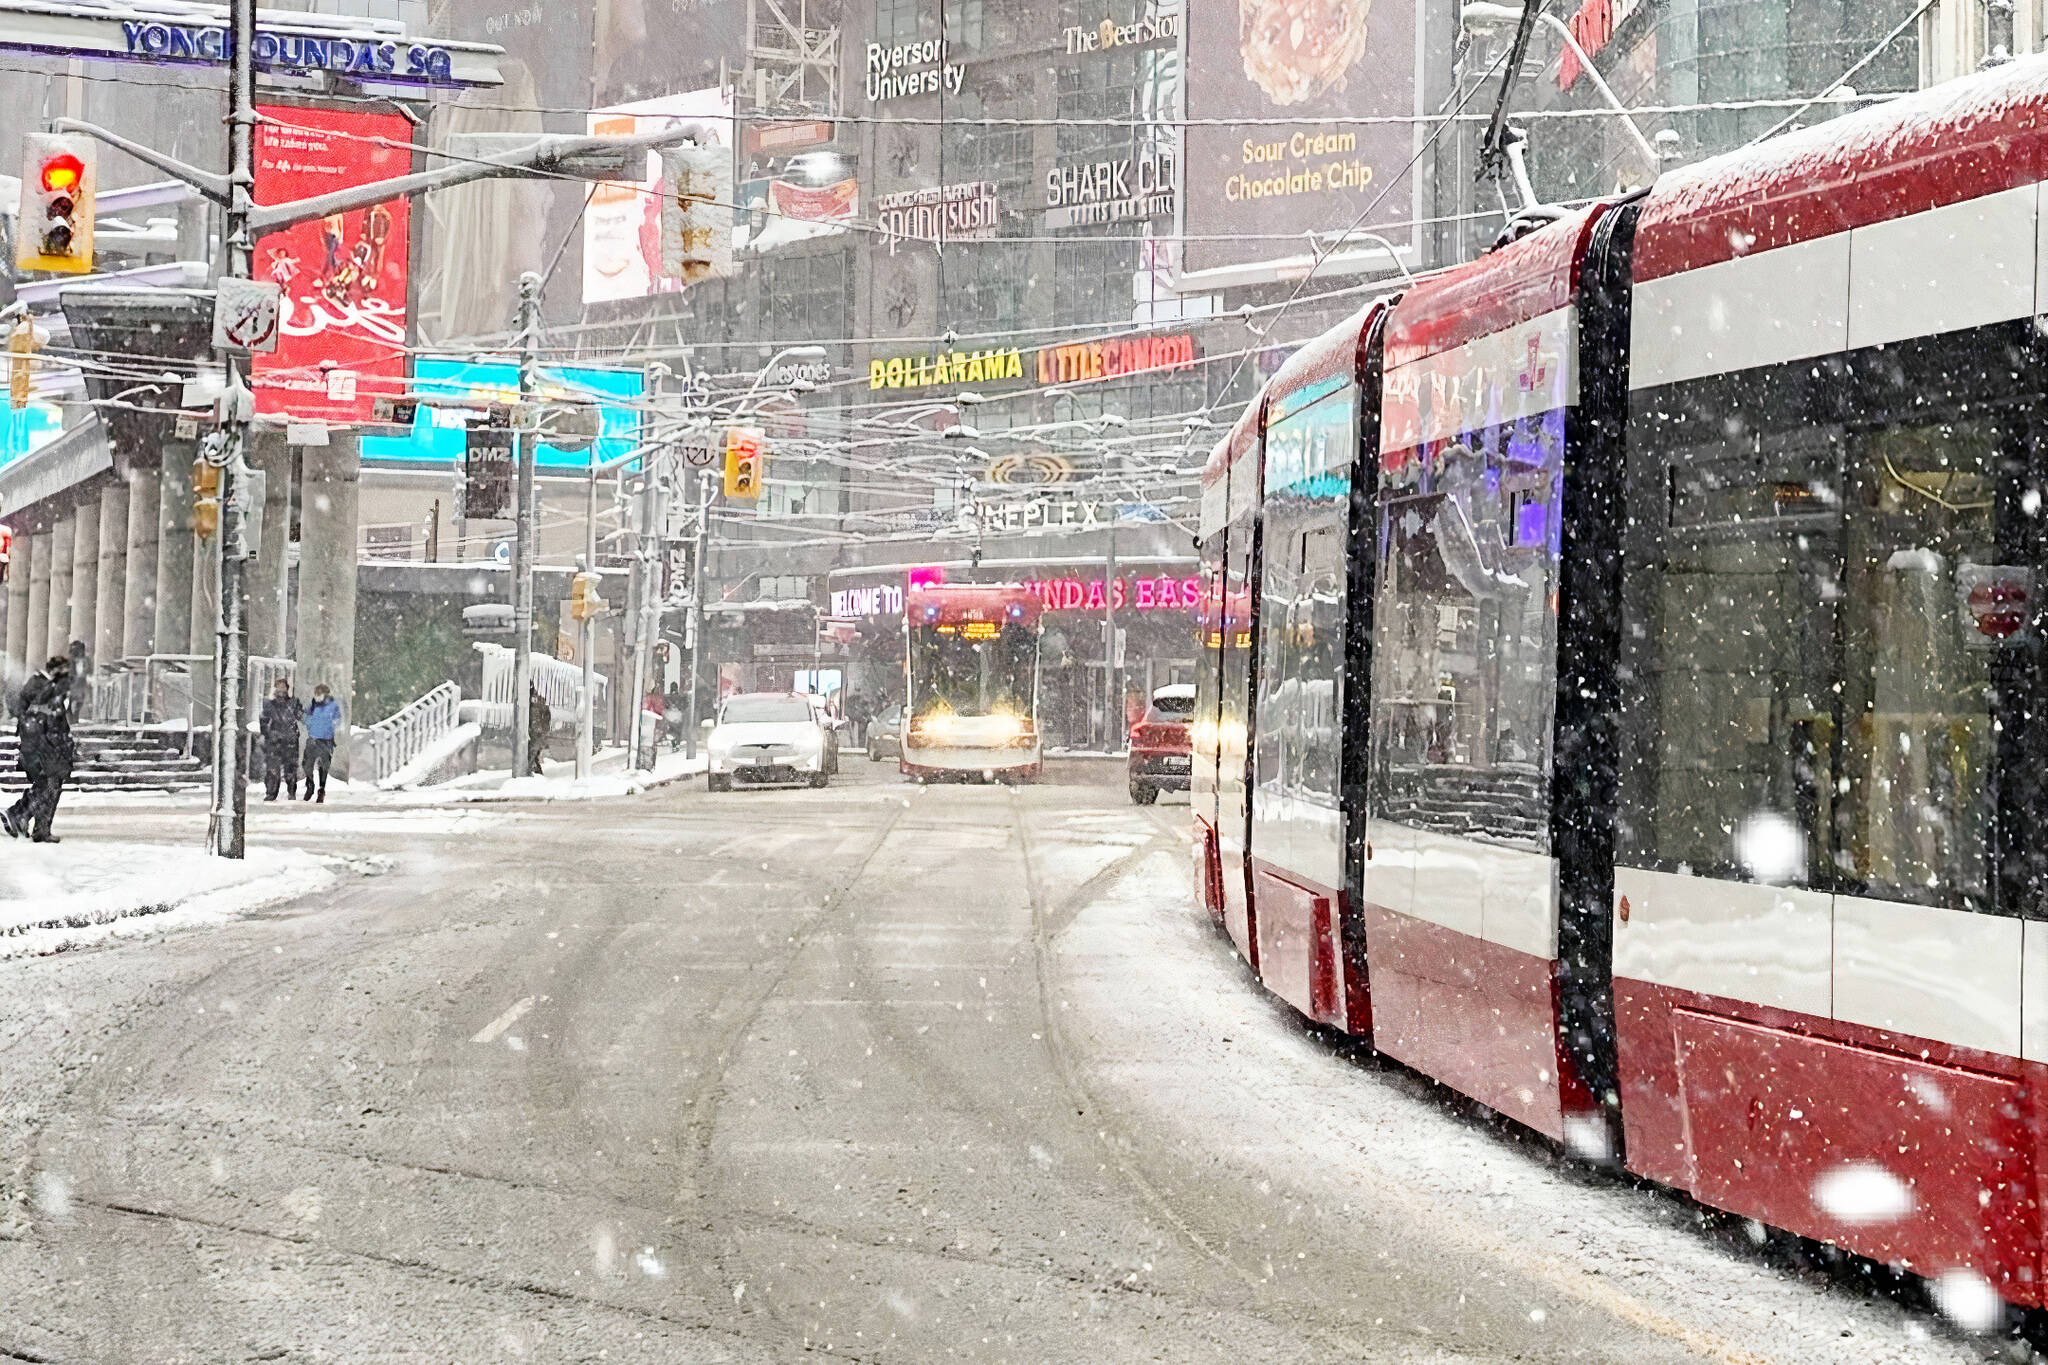 Special weather alert issued for Toronto ahead of widespread snow blast